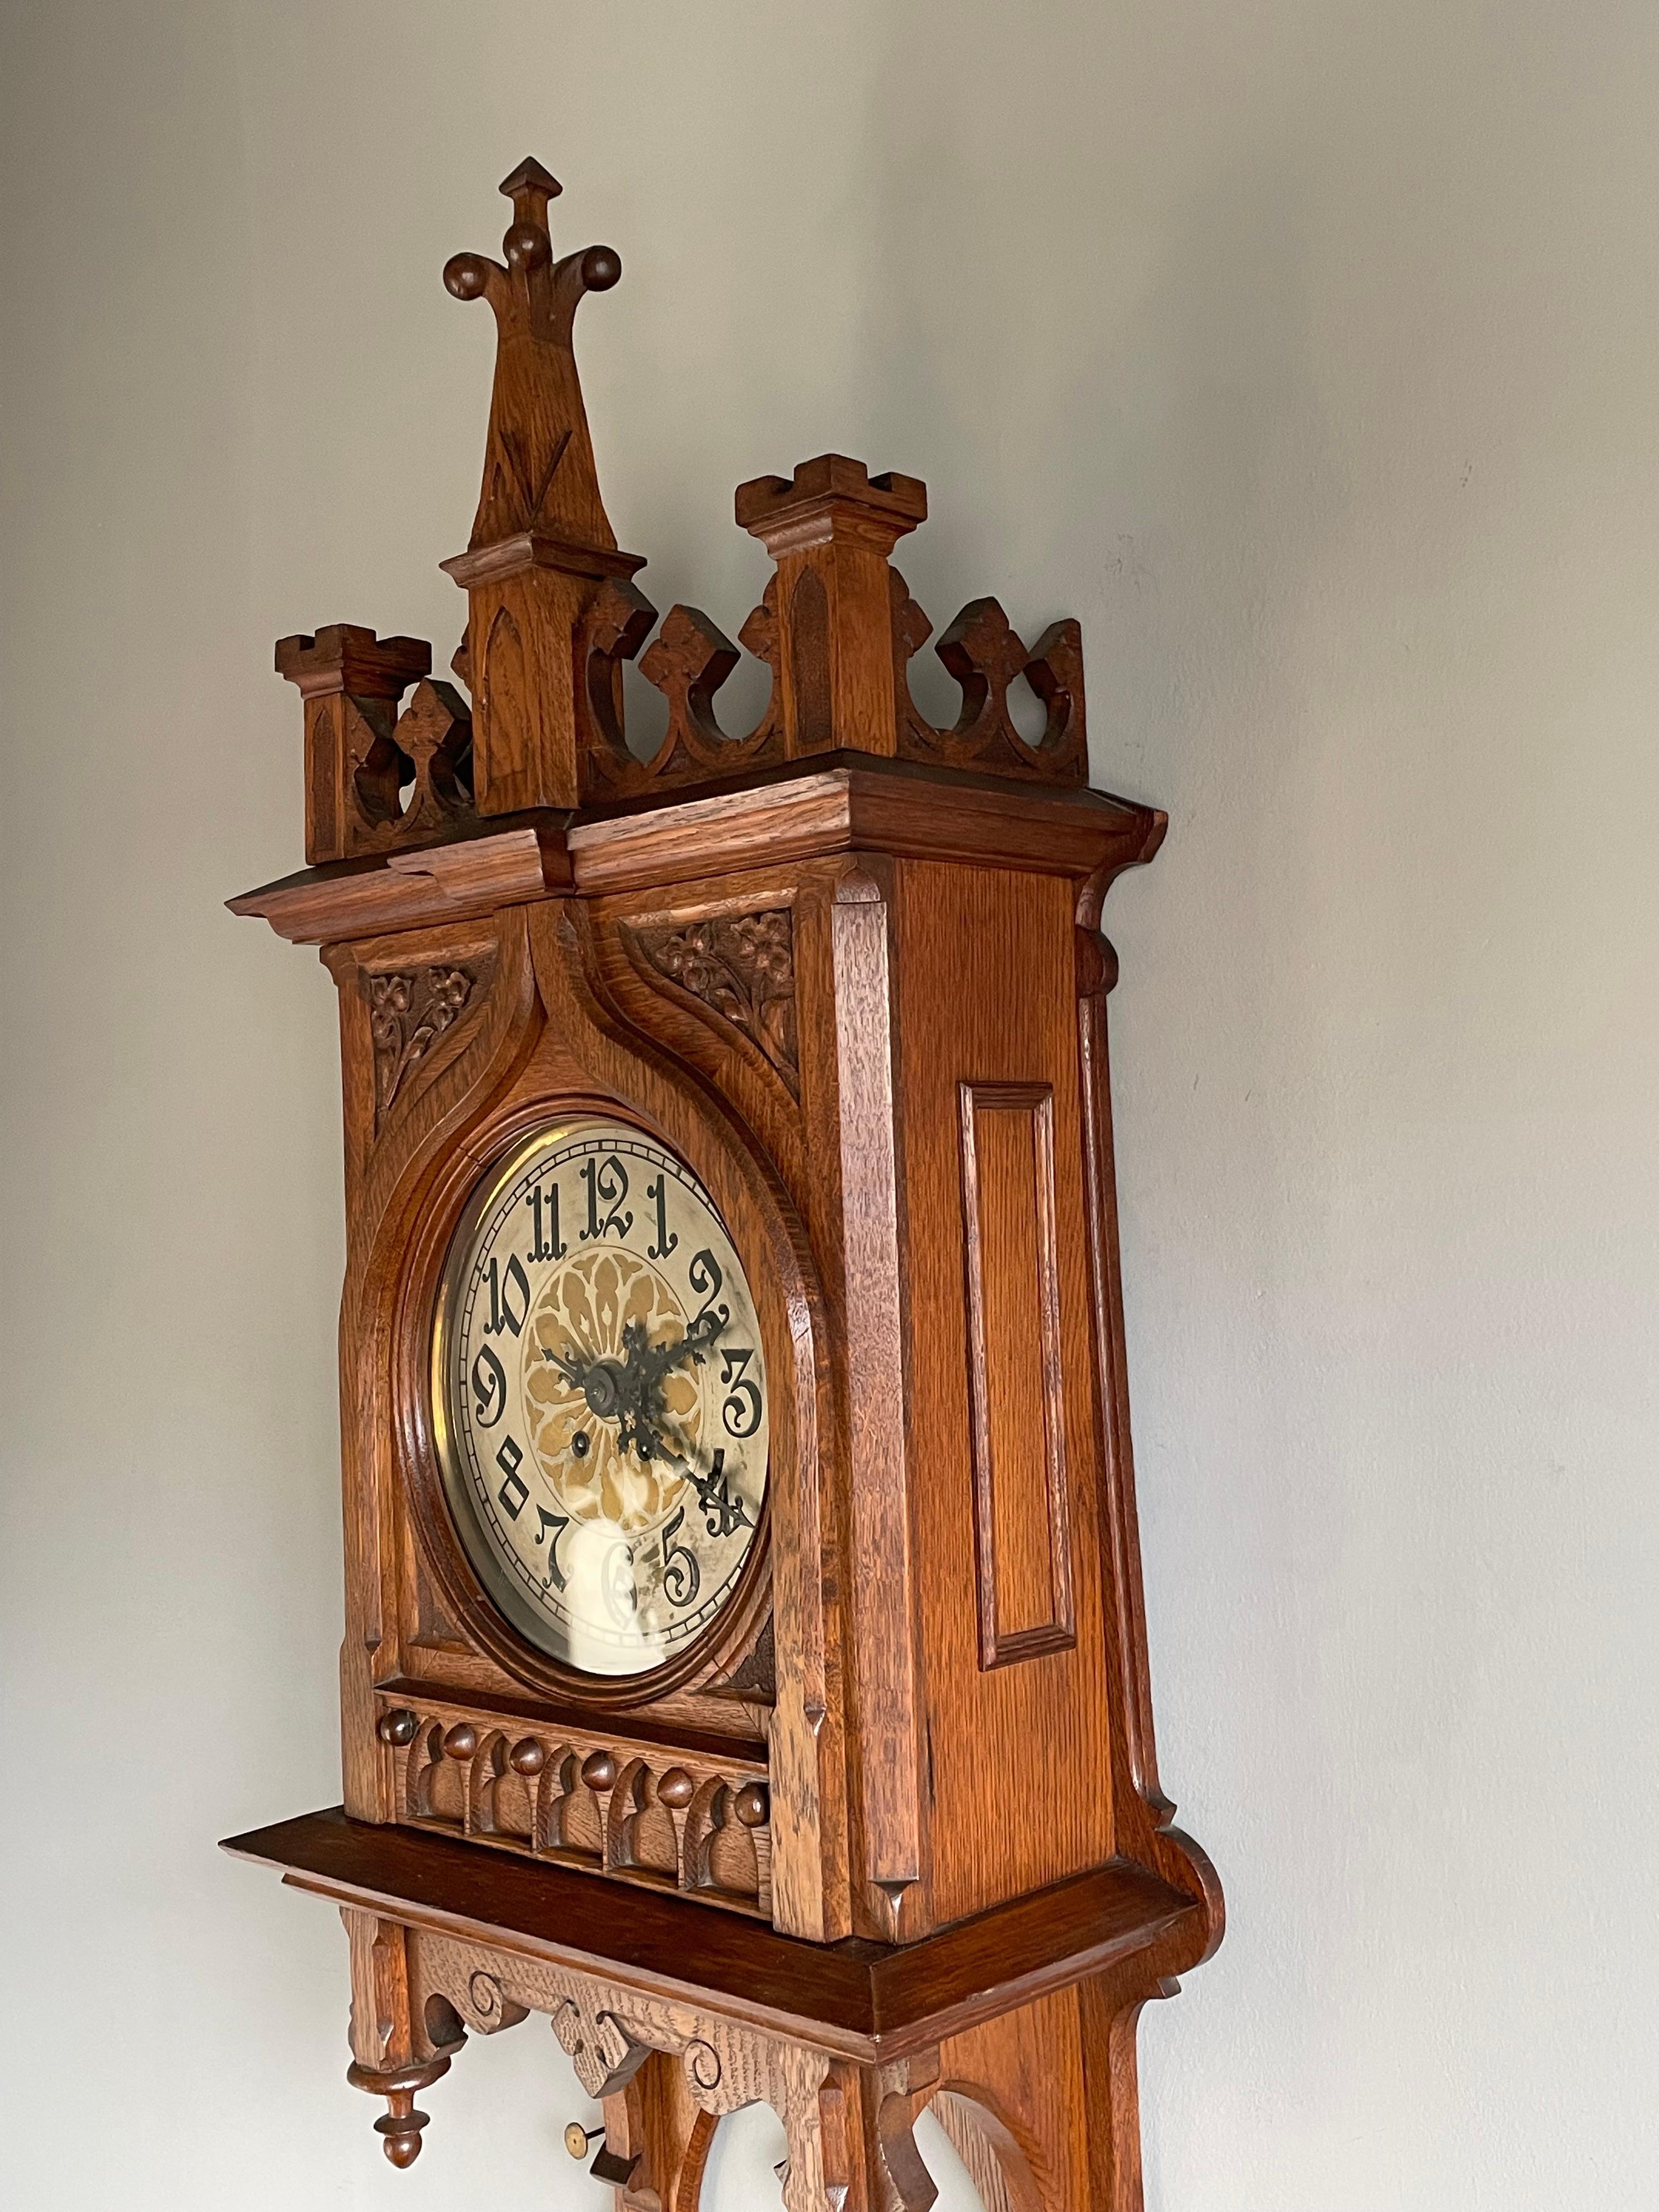 Rare & Large Antique Hand Carved Gothic Revival Wall Clock w. Lenzkirch Movement For Sale 1